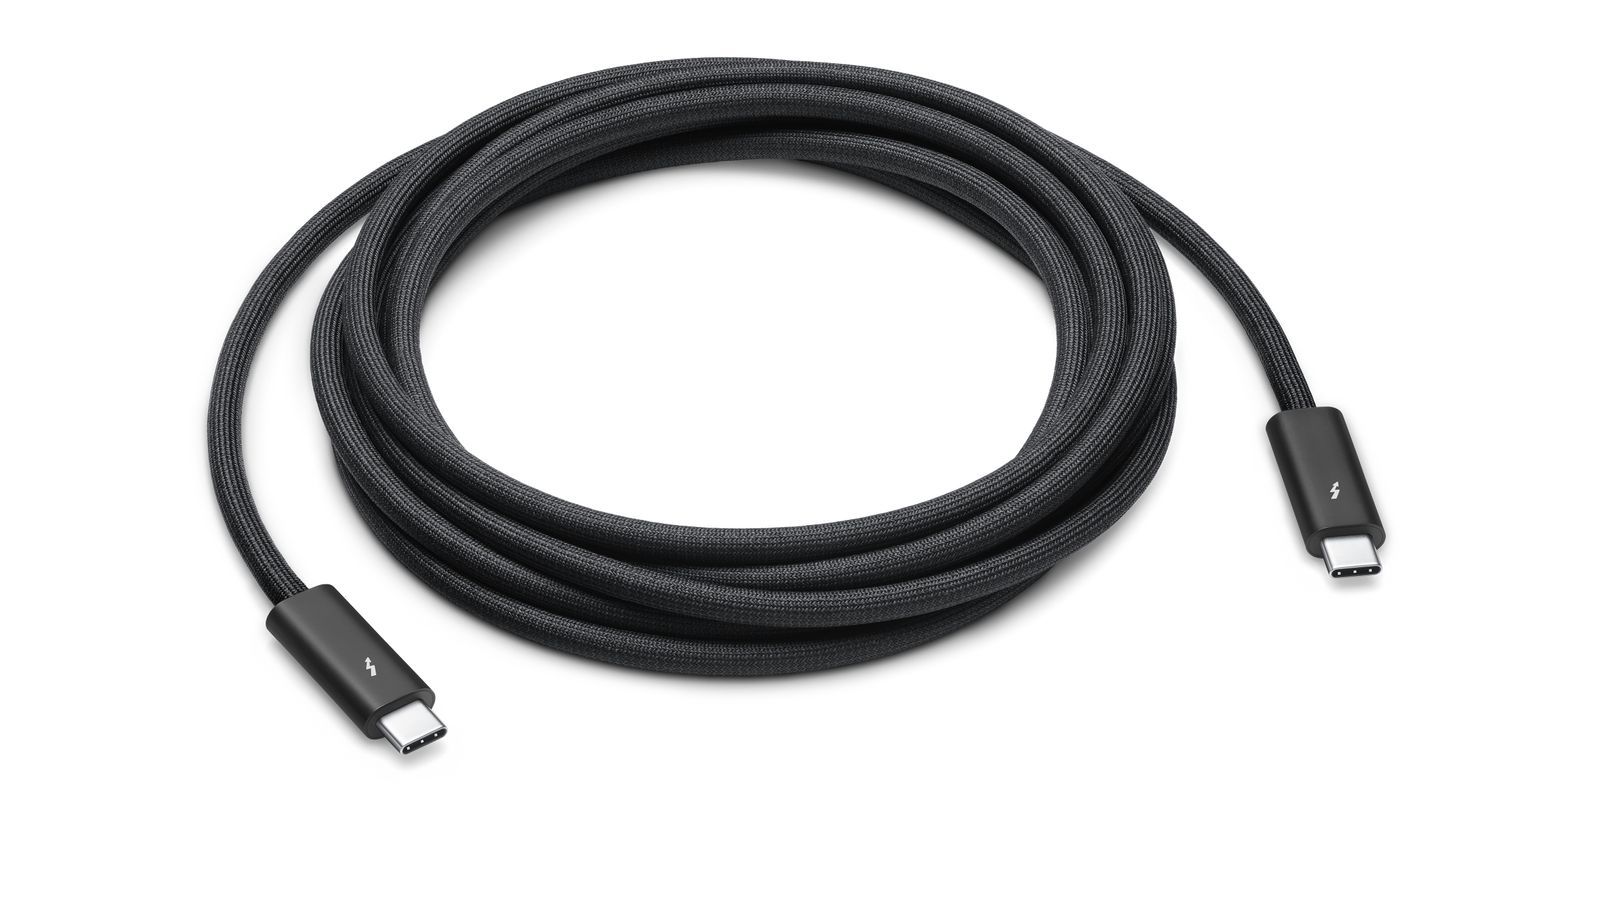 Apple's New Studio Display Includes 1-Meter Thunderbolt Cable With